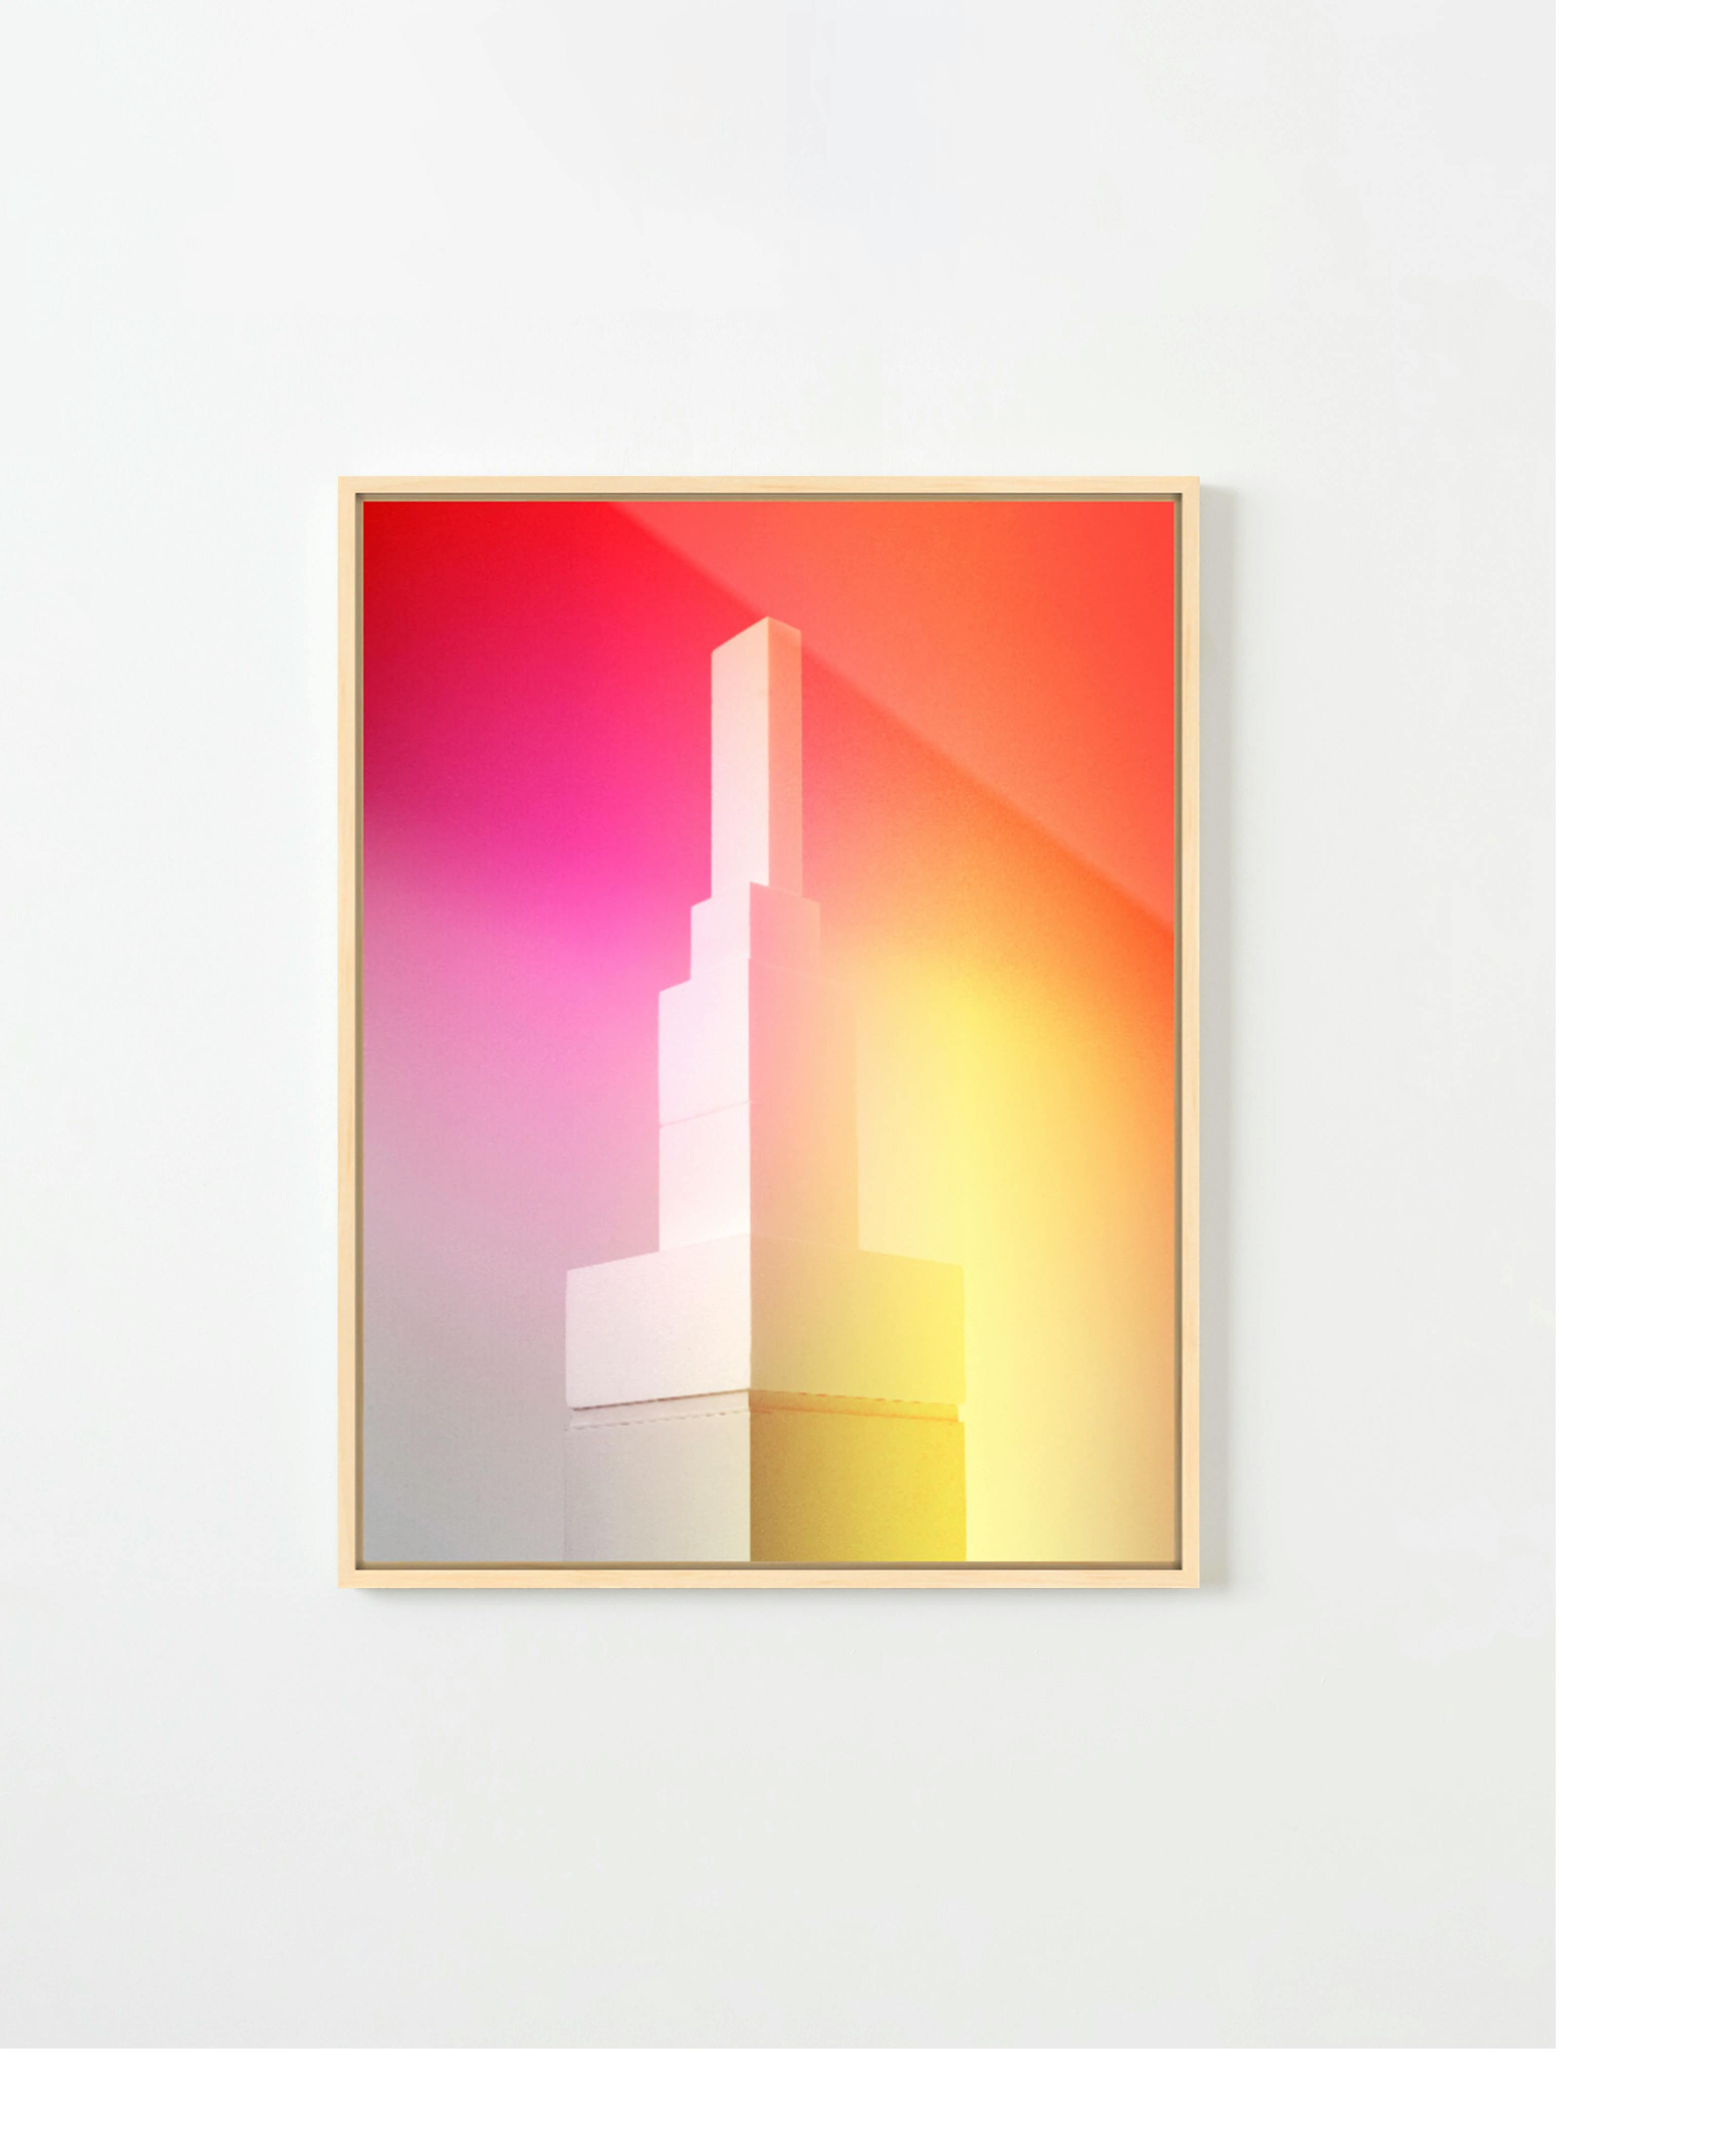 A framed print of an orange and pink gradient overlaid on a white styrofoam tower by artist Adam Ryder.